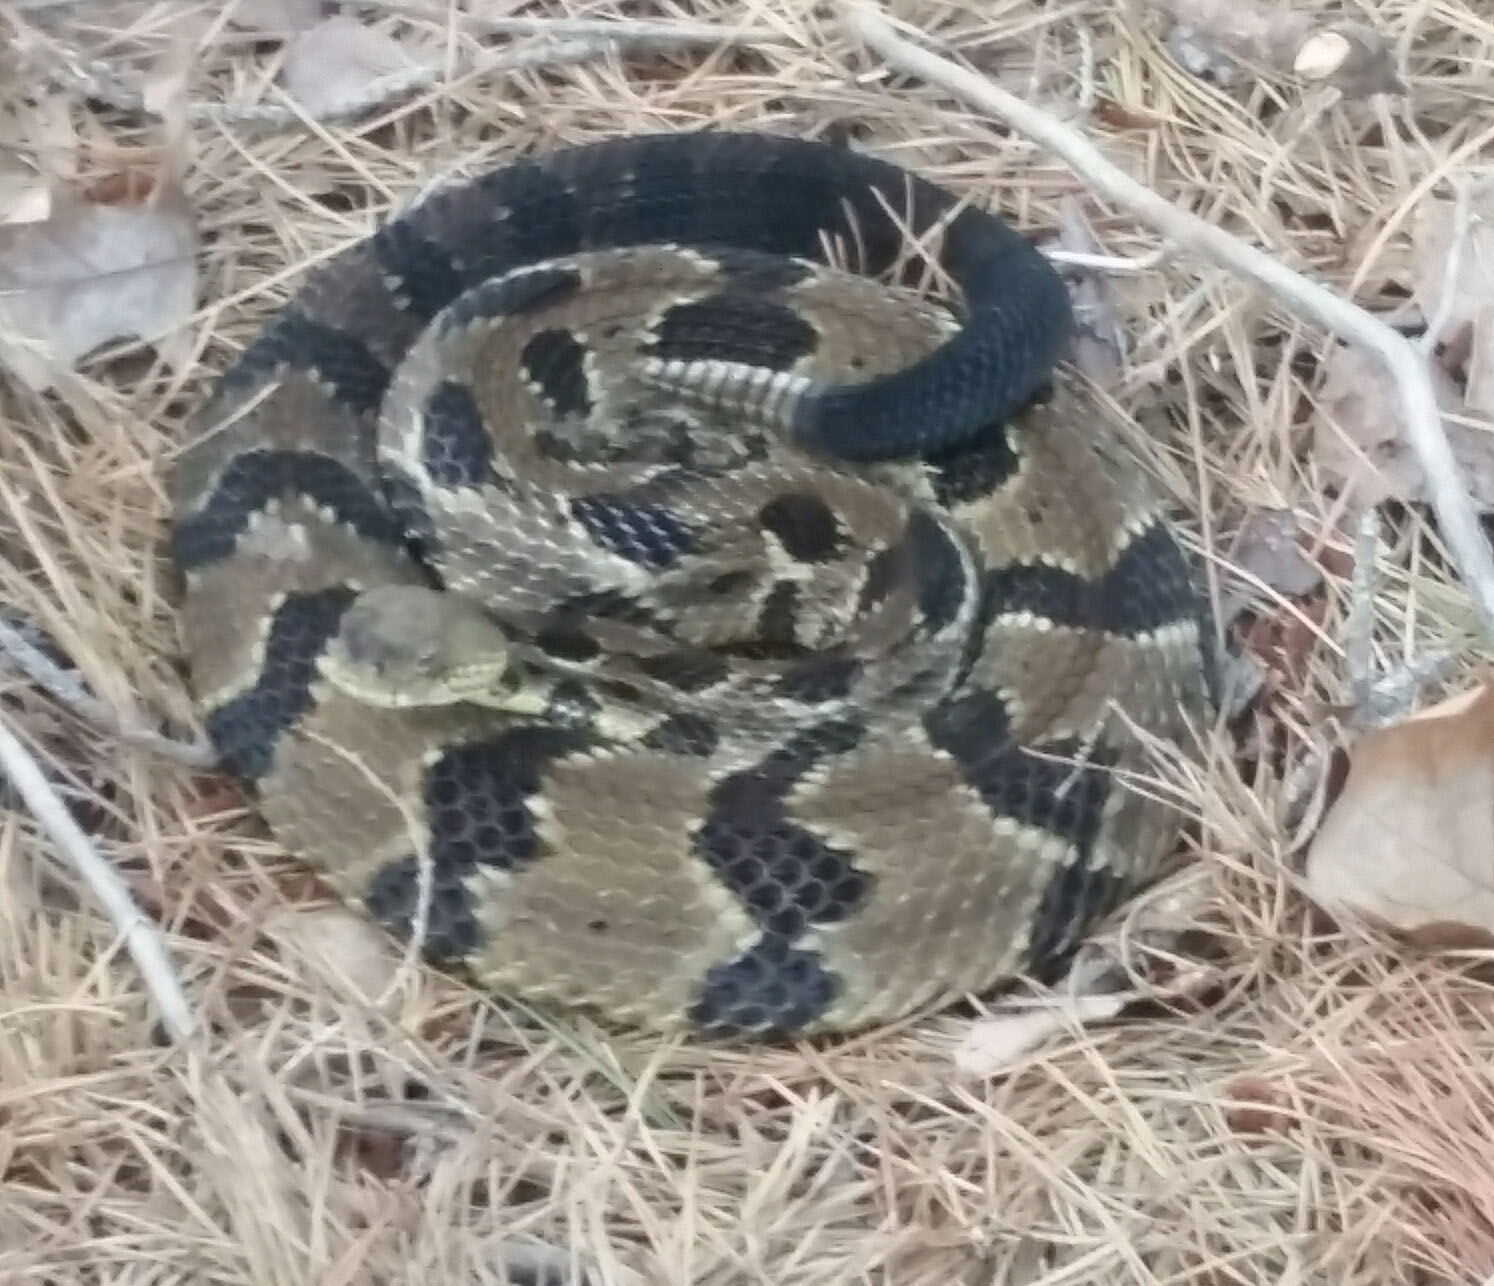 The timber rattlesnake. (Photo: Manchester Township Police)